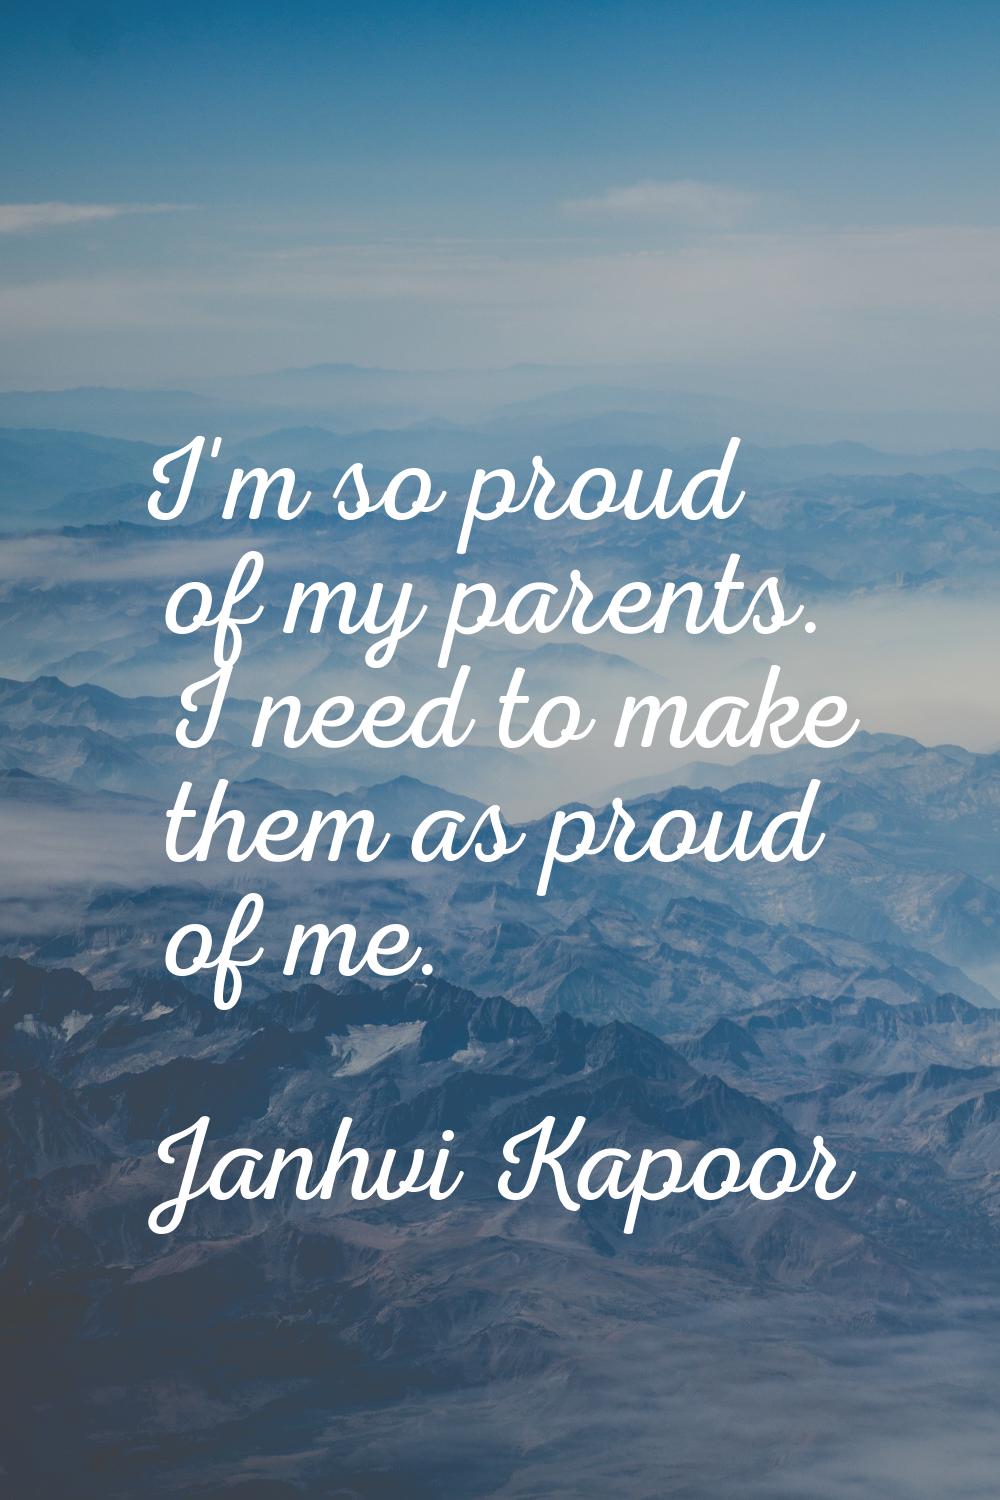 I'm so proud of my parents. I need to make them as proud of me.